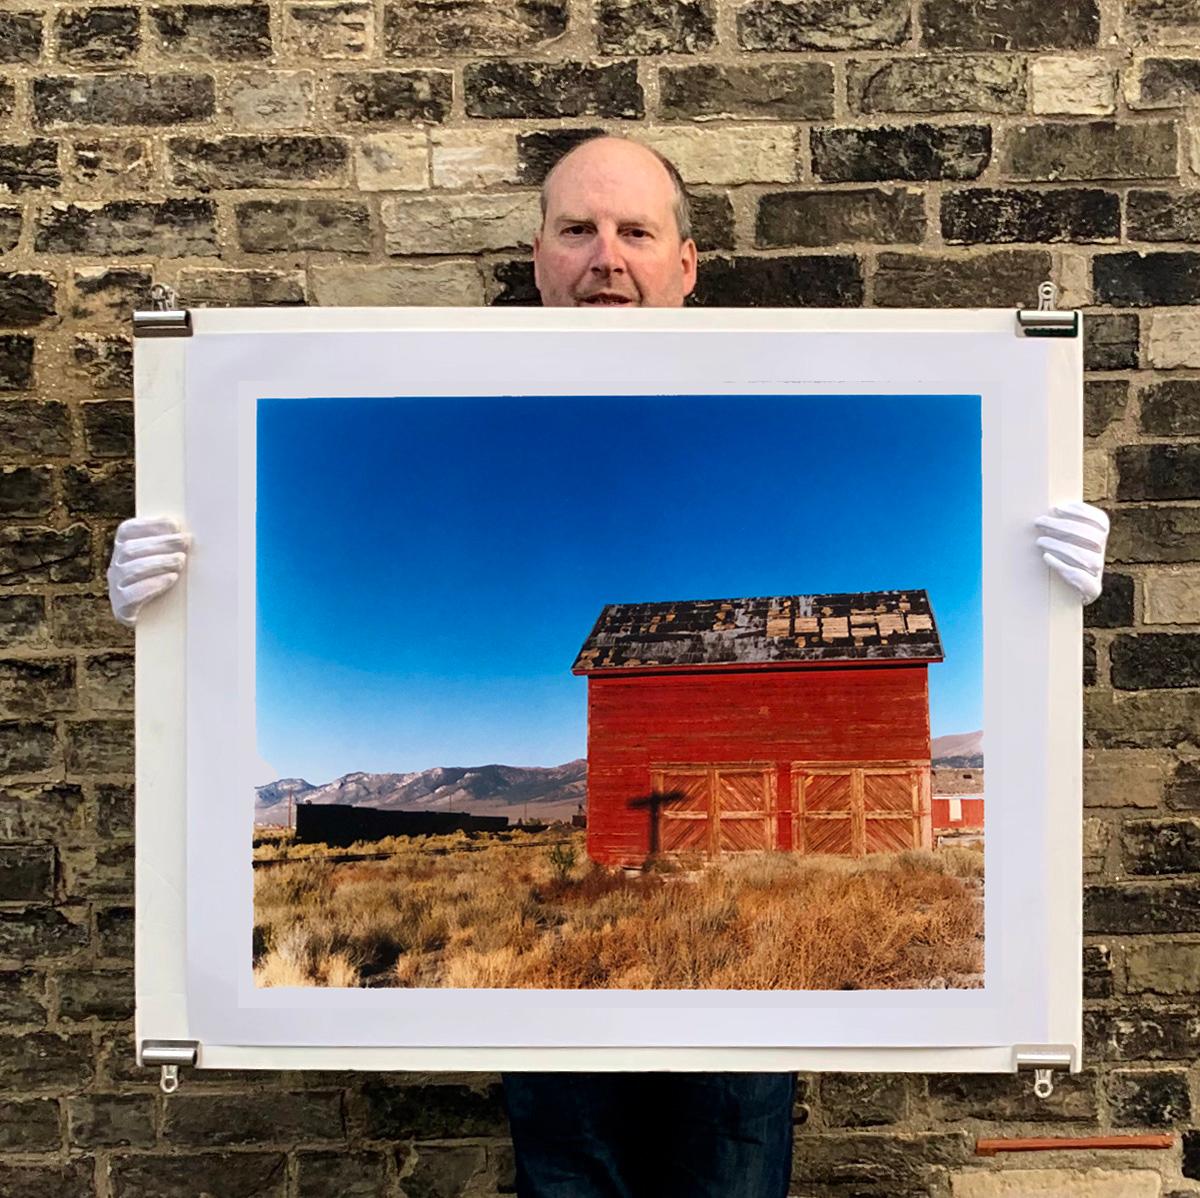 Shed - Railroad Depot, Nevada, 2003 - After the Gold Rush - Architecture Photo  - Contemporain Print par Richard Heeps